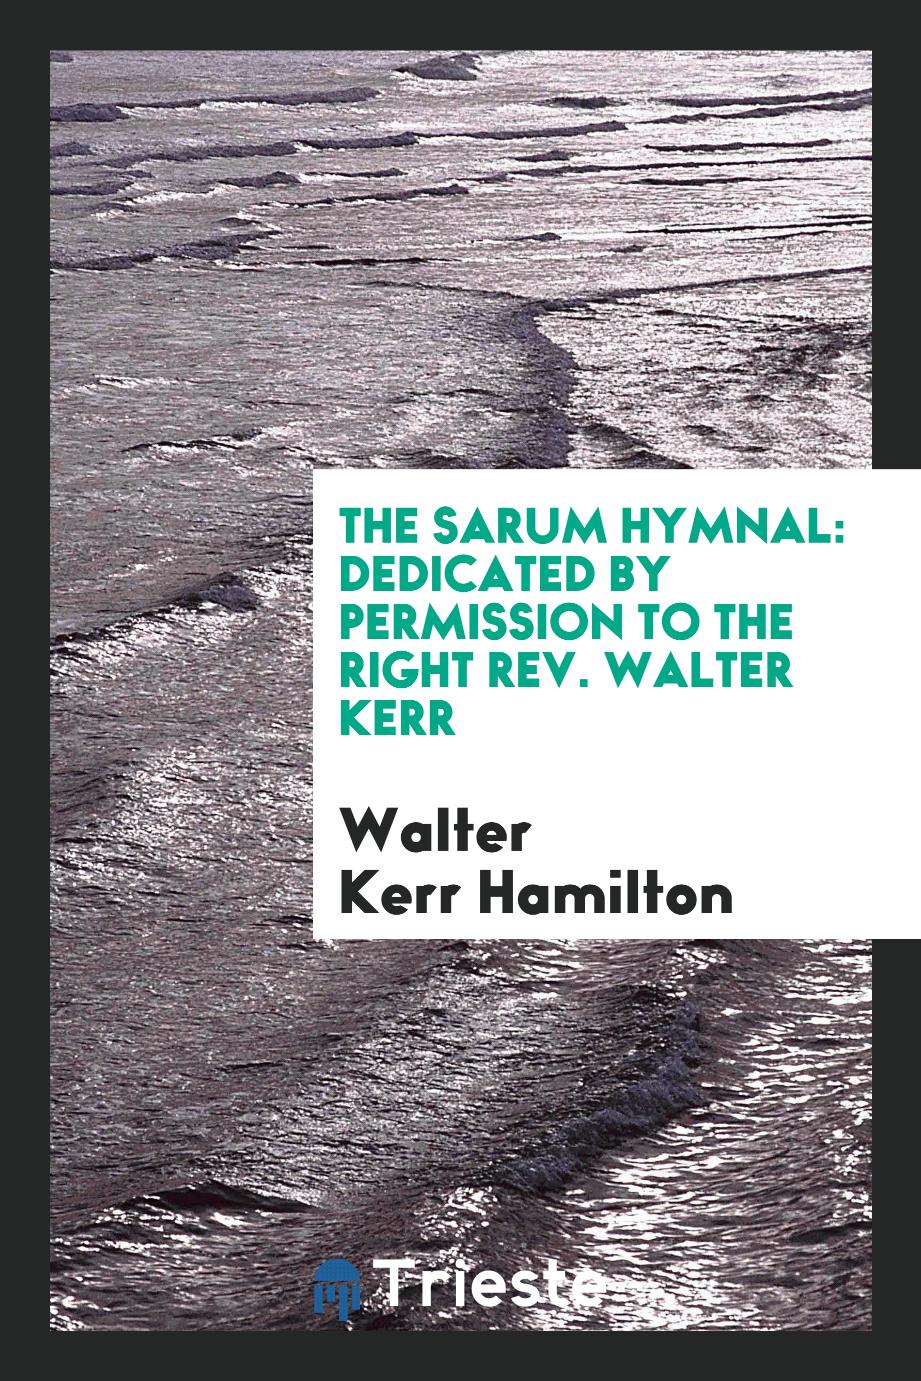 The Sarum Hymnal: Dedicated by Permission to the Right Rev. Walter Kerr